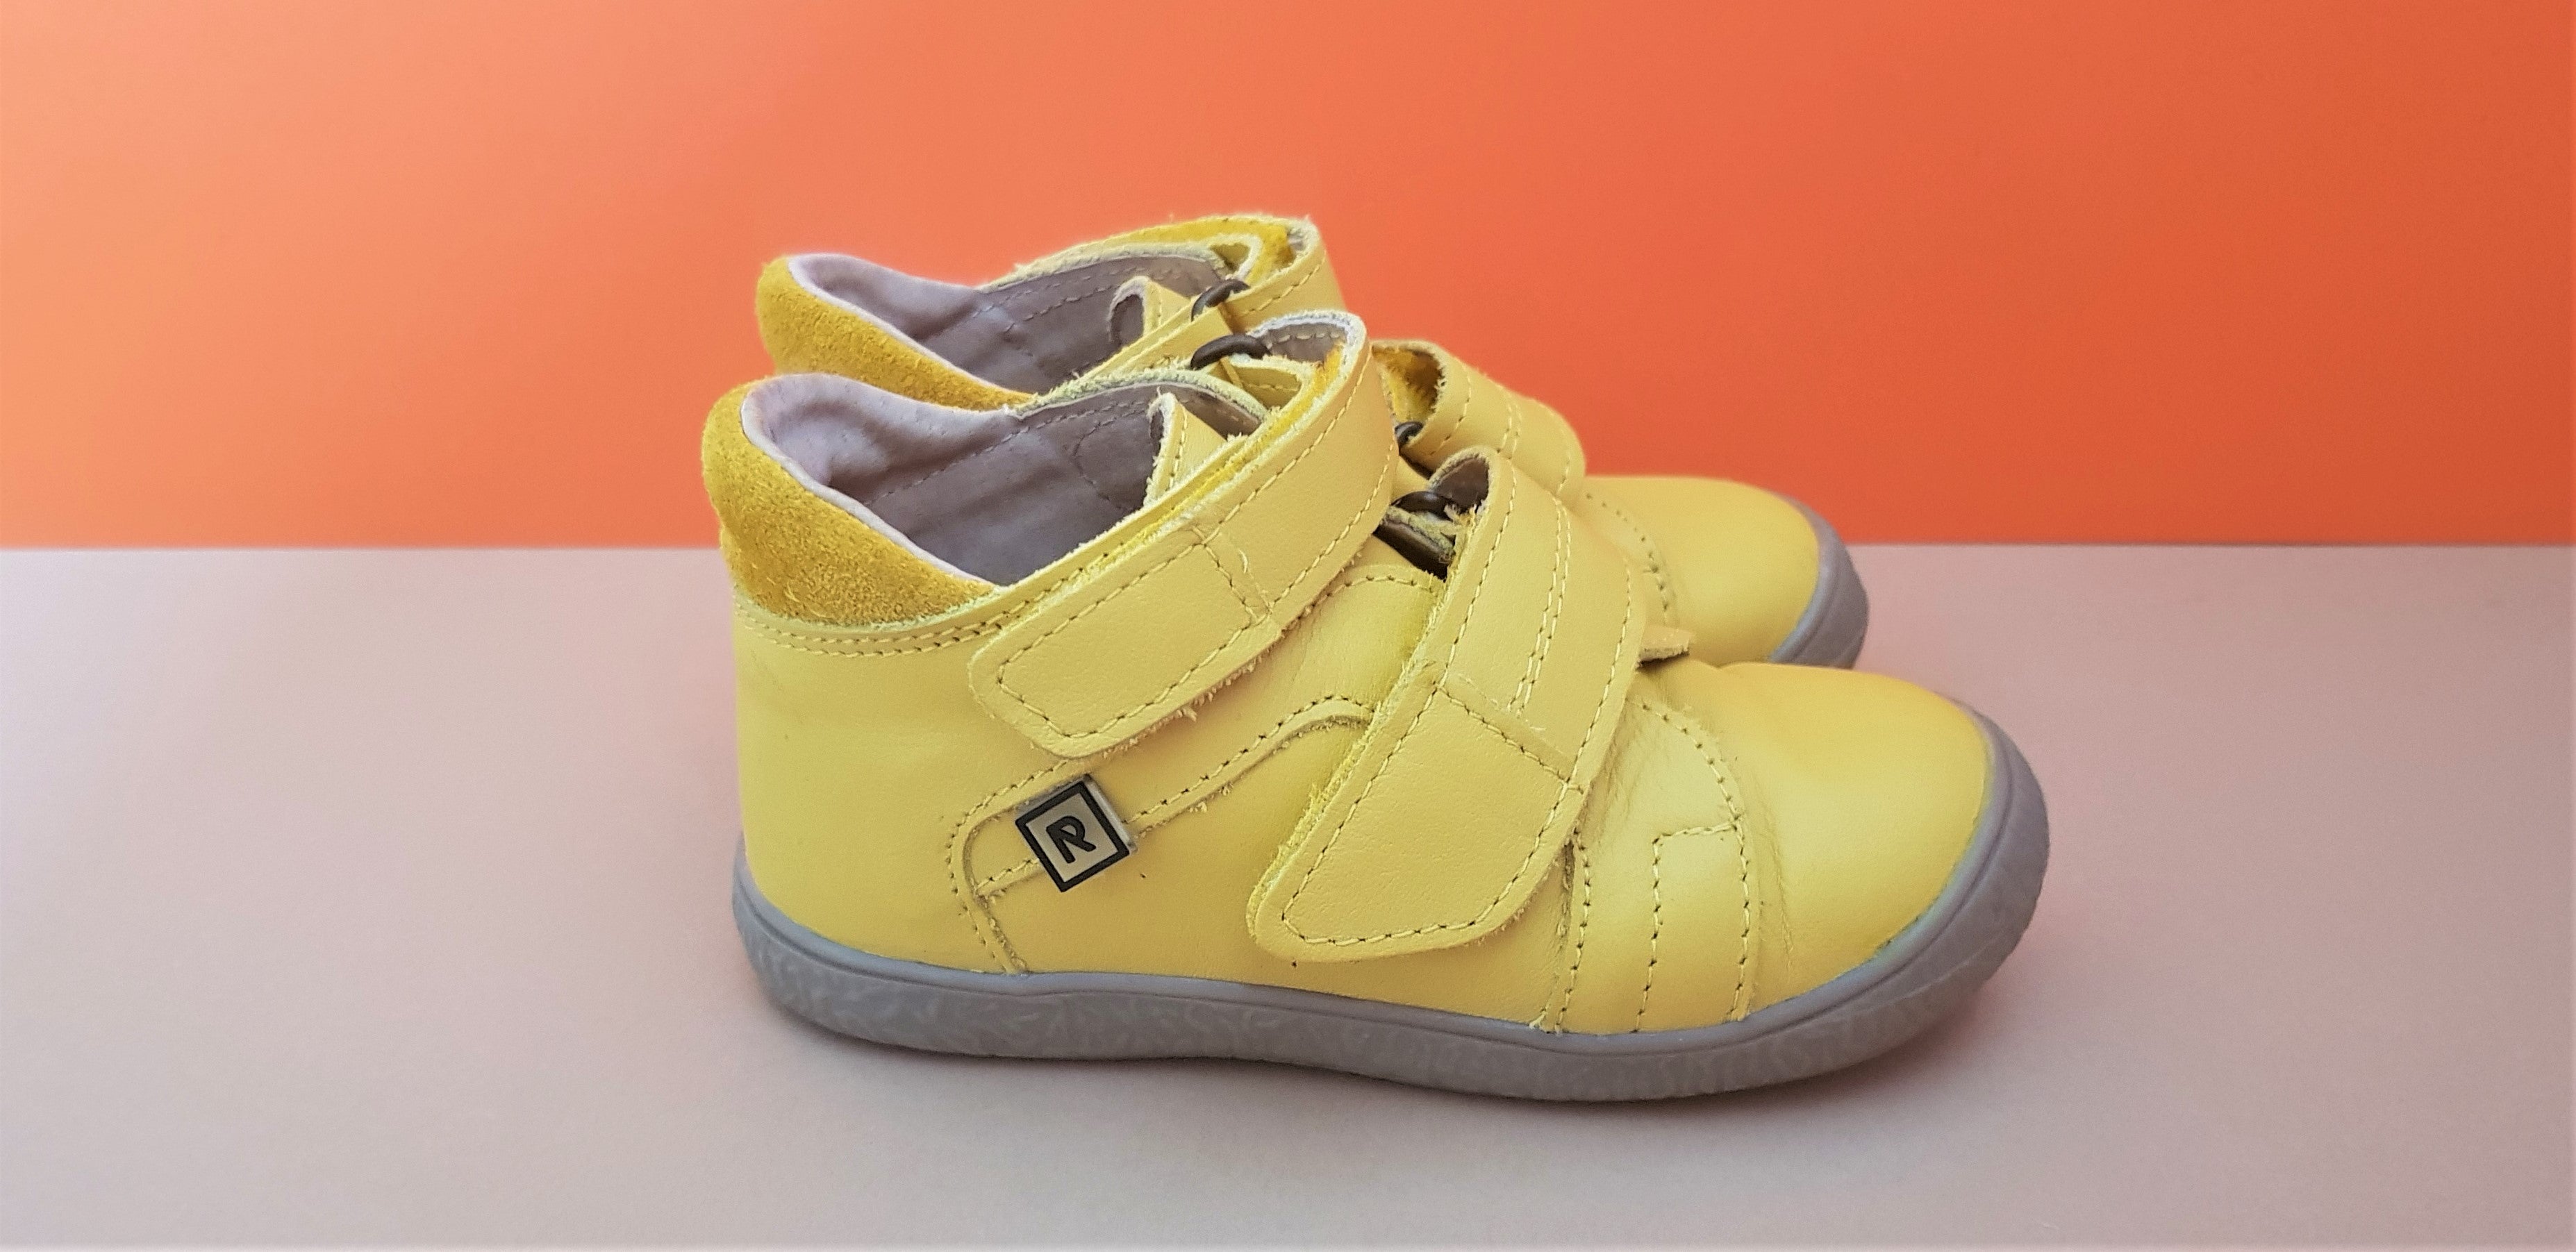 Yellow Handmade high-quality soft leather children shoes with brown sole, hook-and-loop fasteners and round toe box